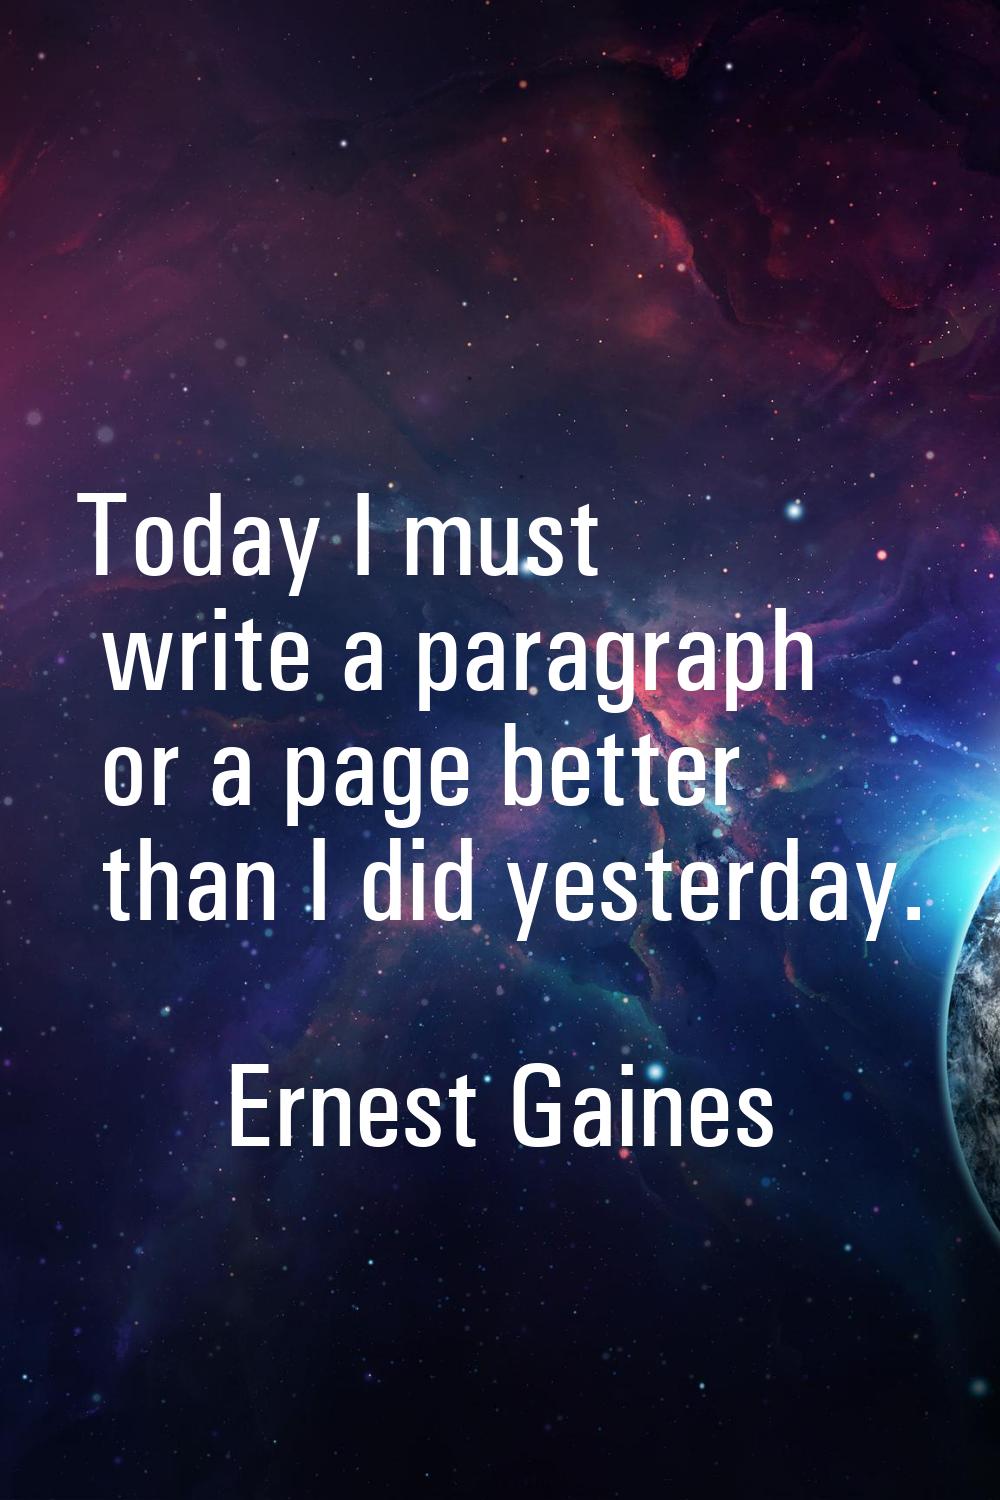 Today I must write a paragraph or a page better than I did yesterday.